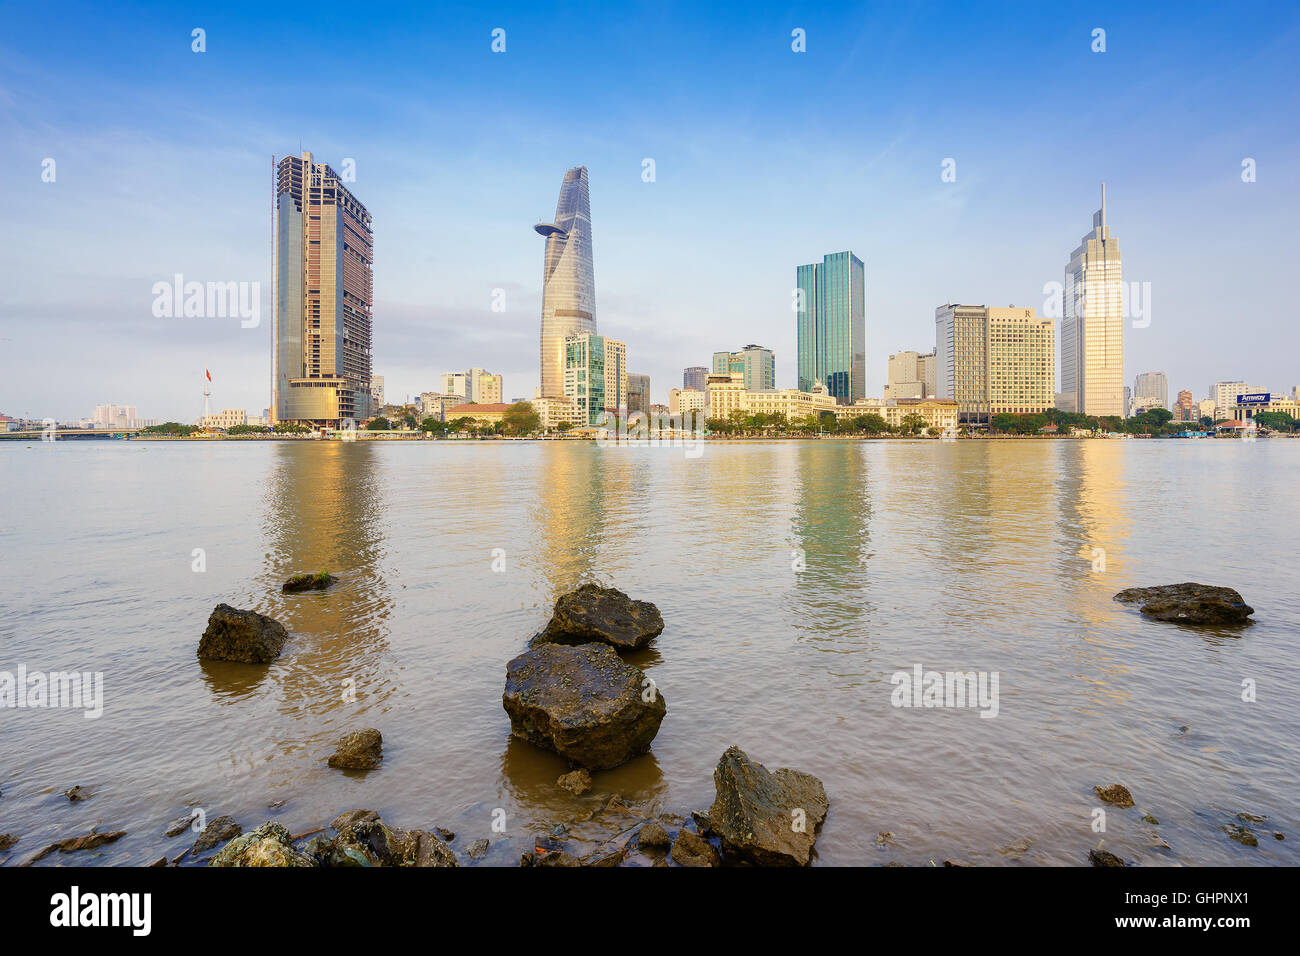 Ho Chi Minh city skyline and the Saigon river in early morning, Vietnam. Stock Photo